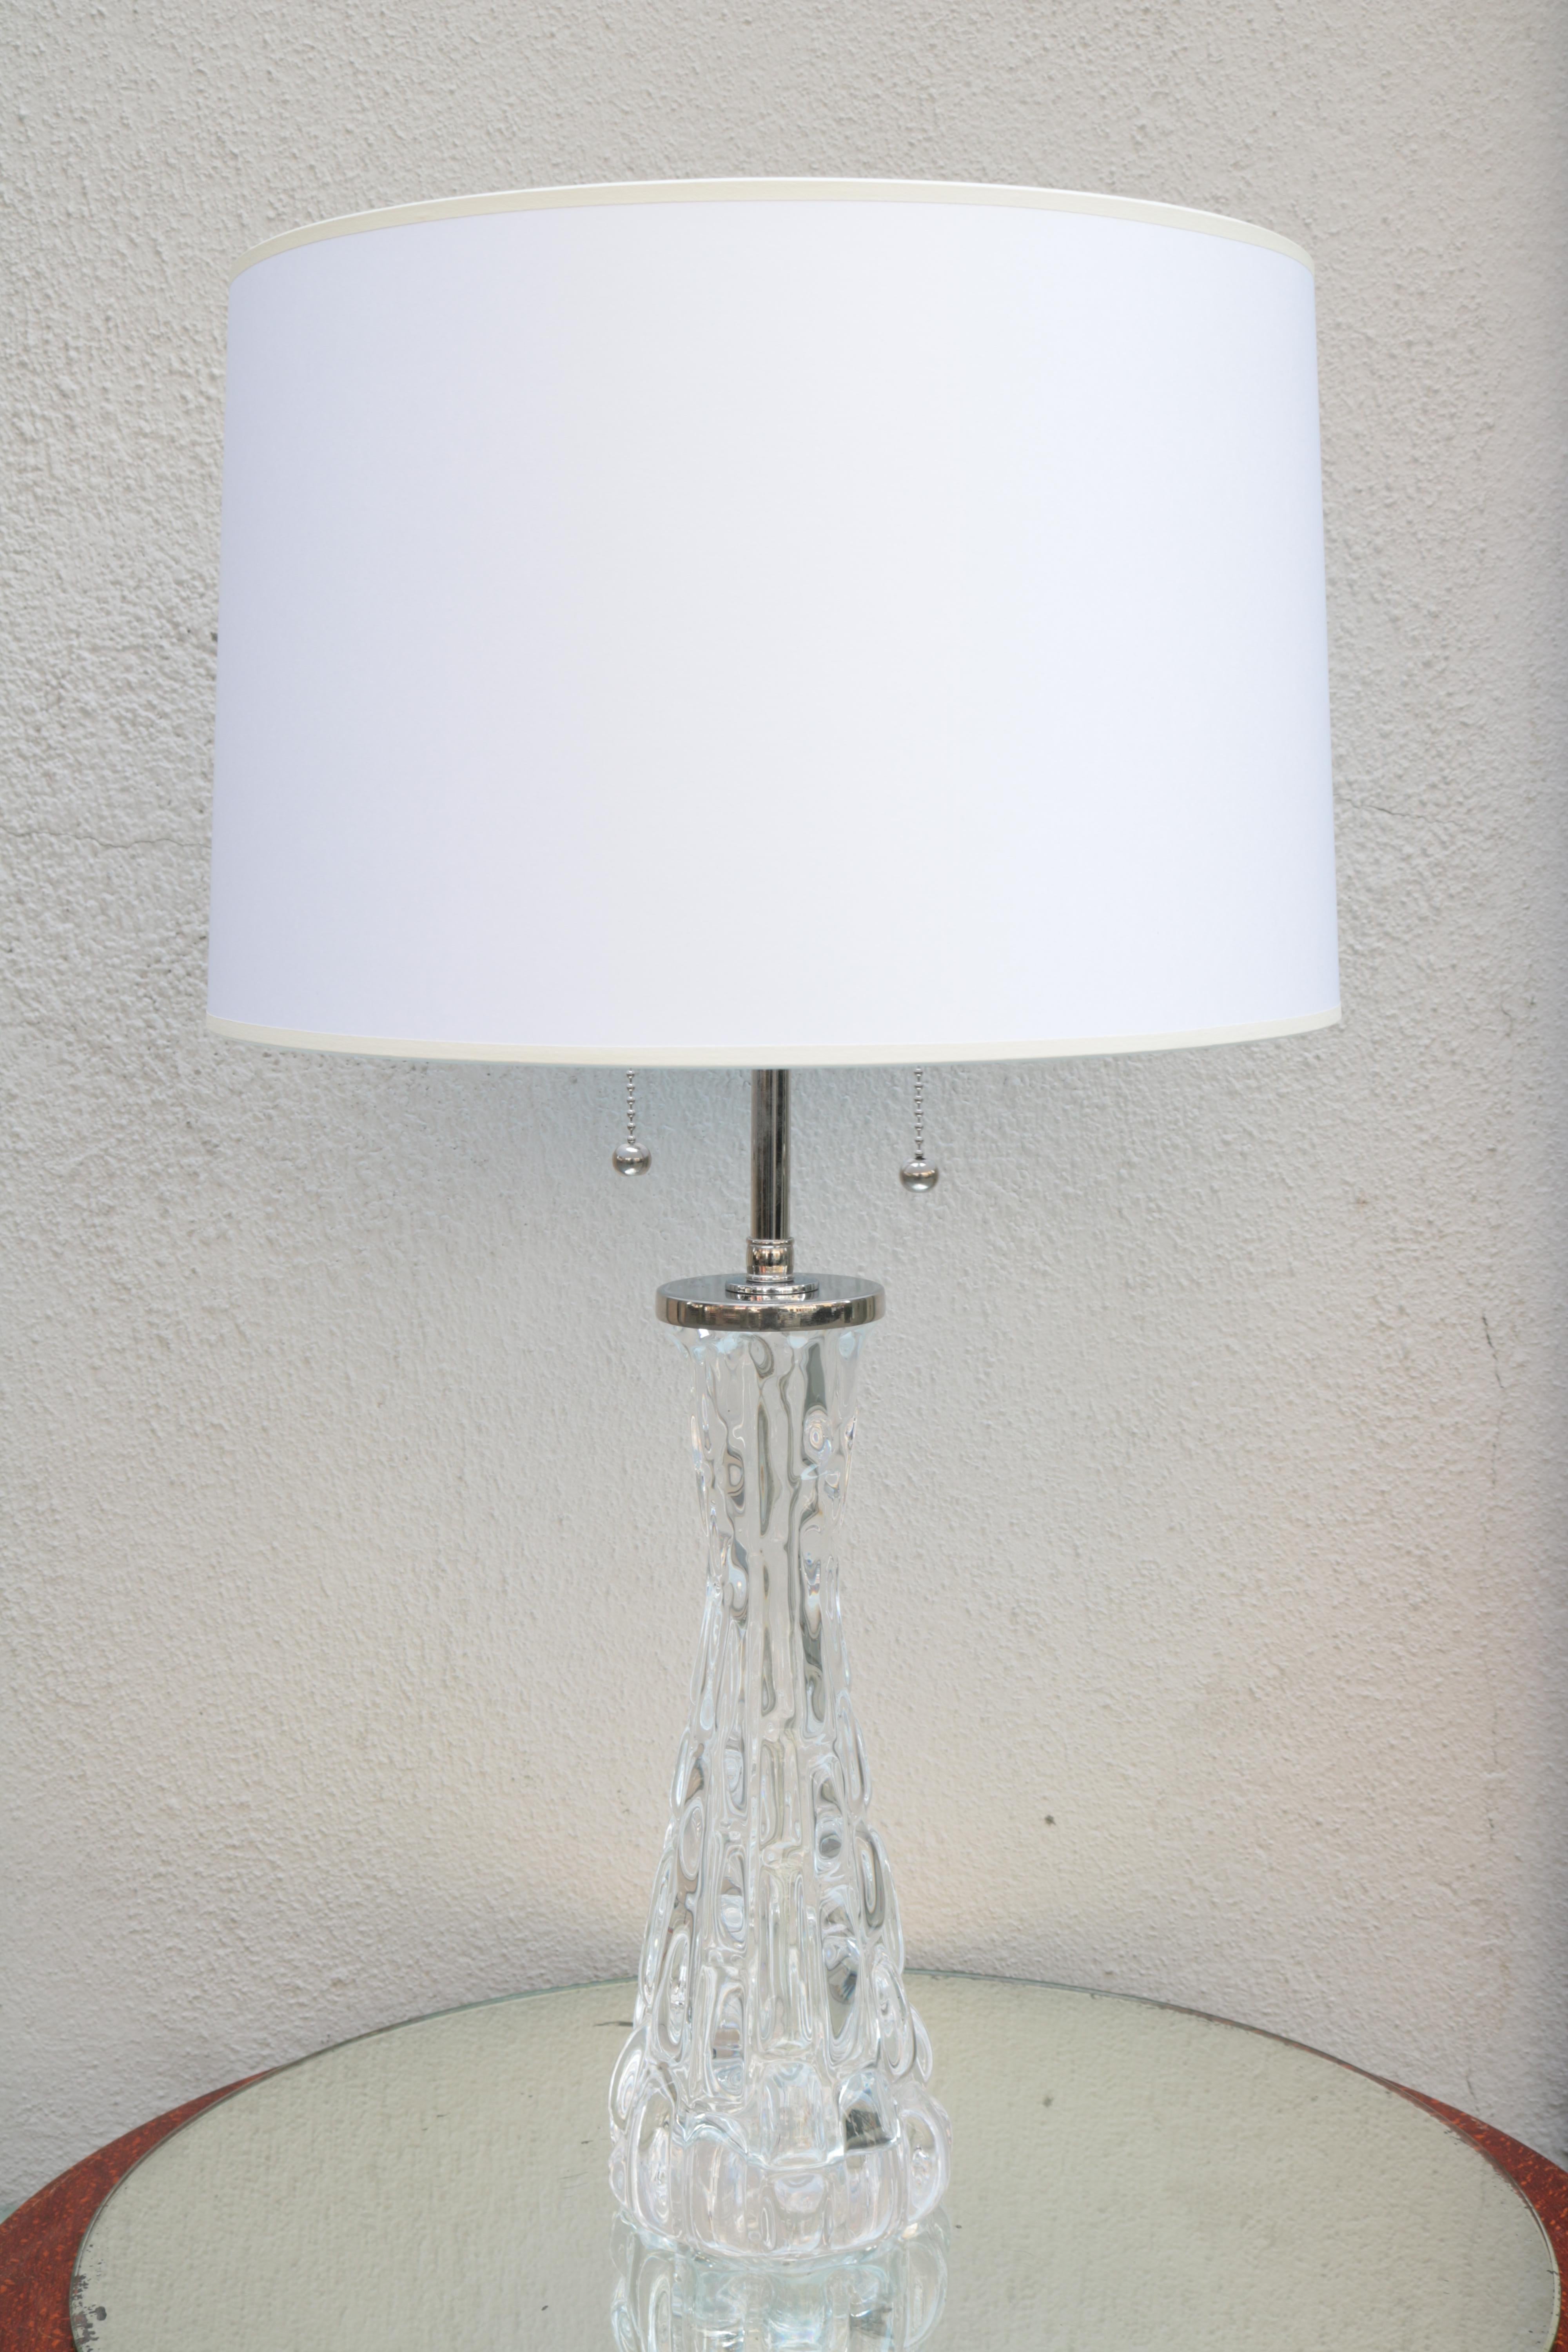 A pair of Orrefors Modernist crystal table lamps with Orrefors Signature. 
Crystal and polished nickel.